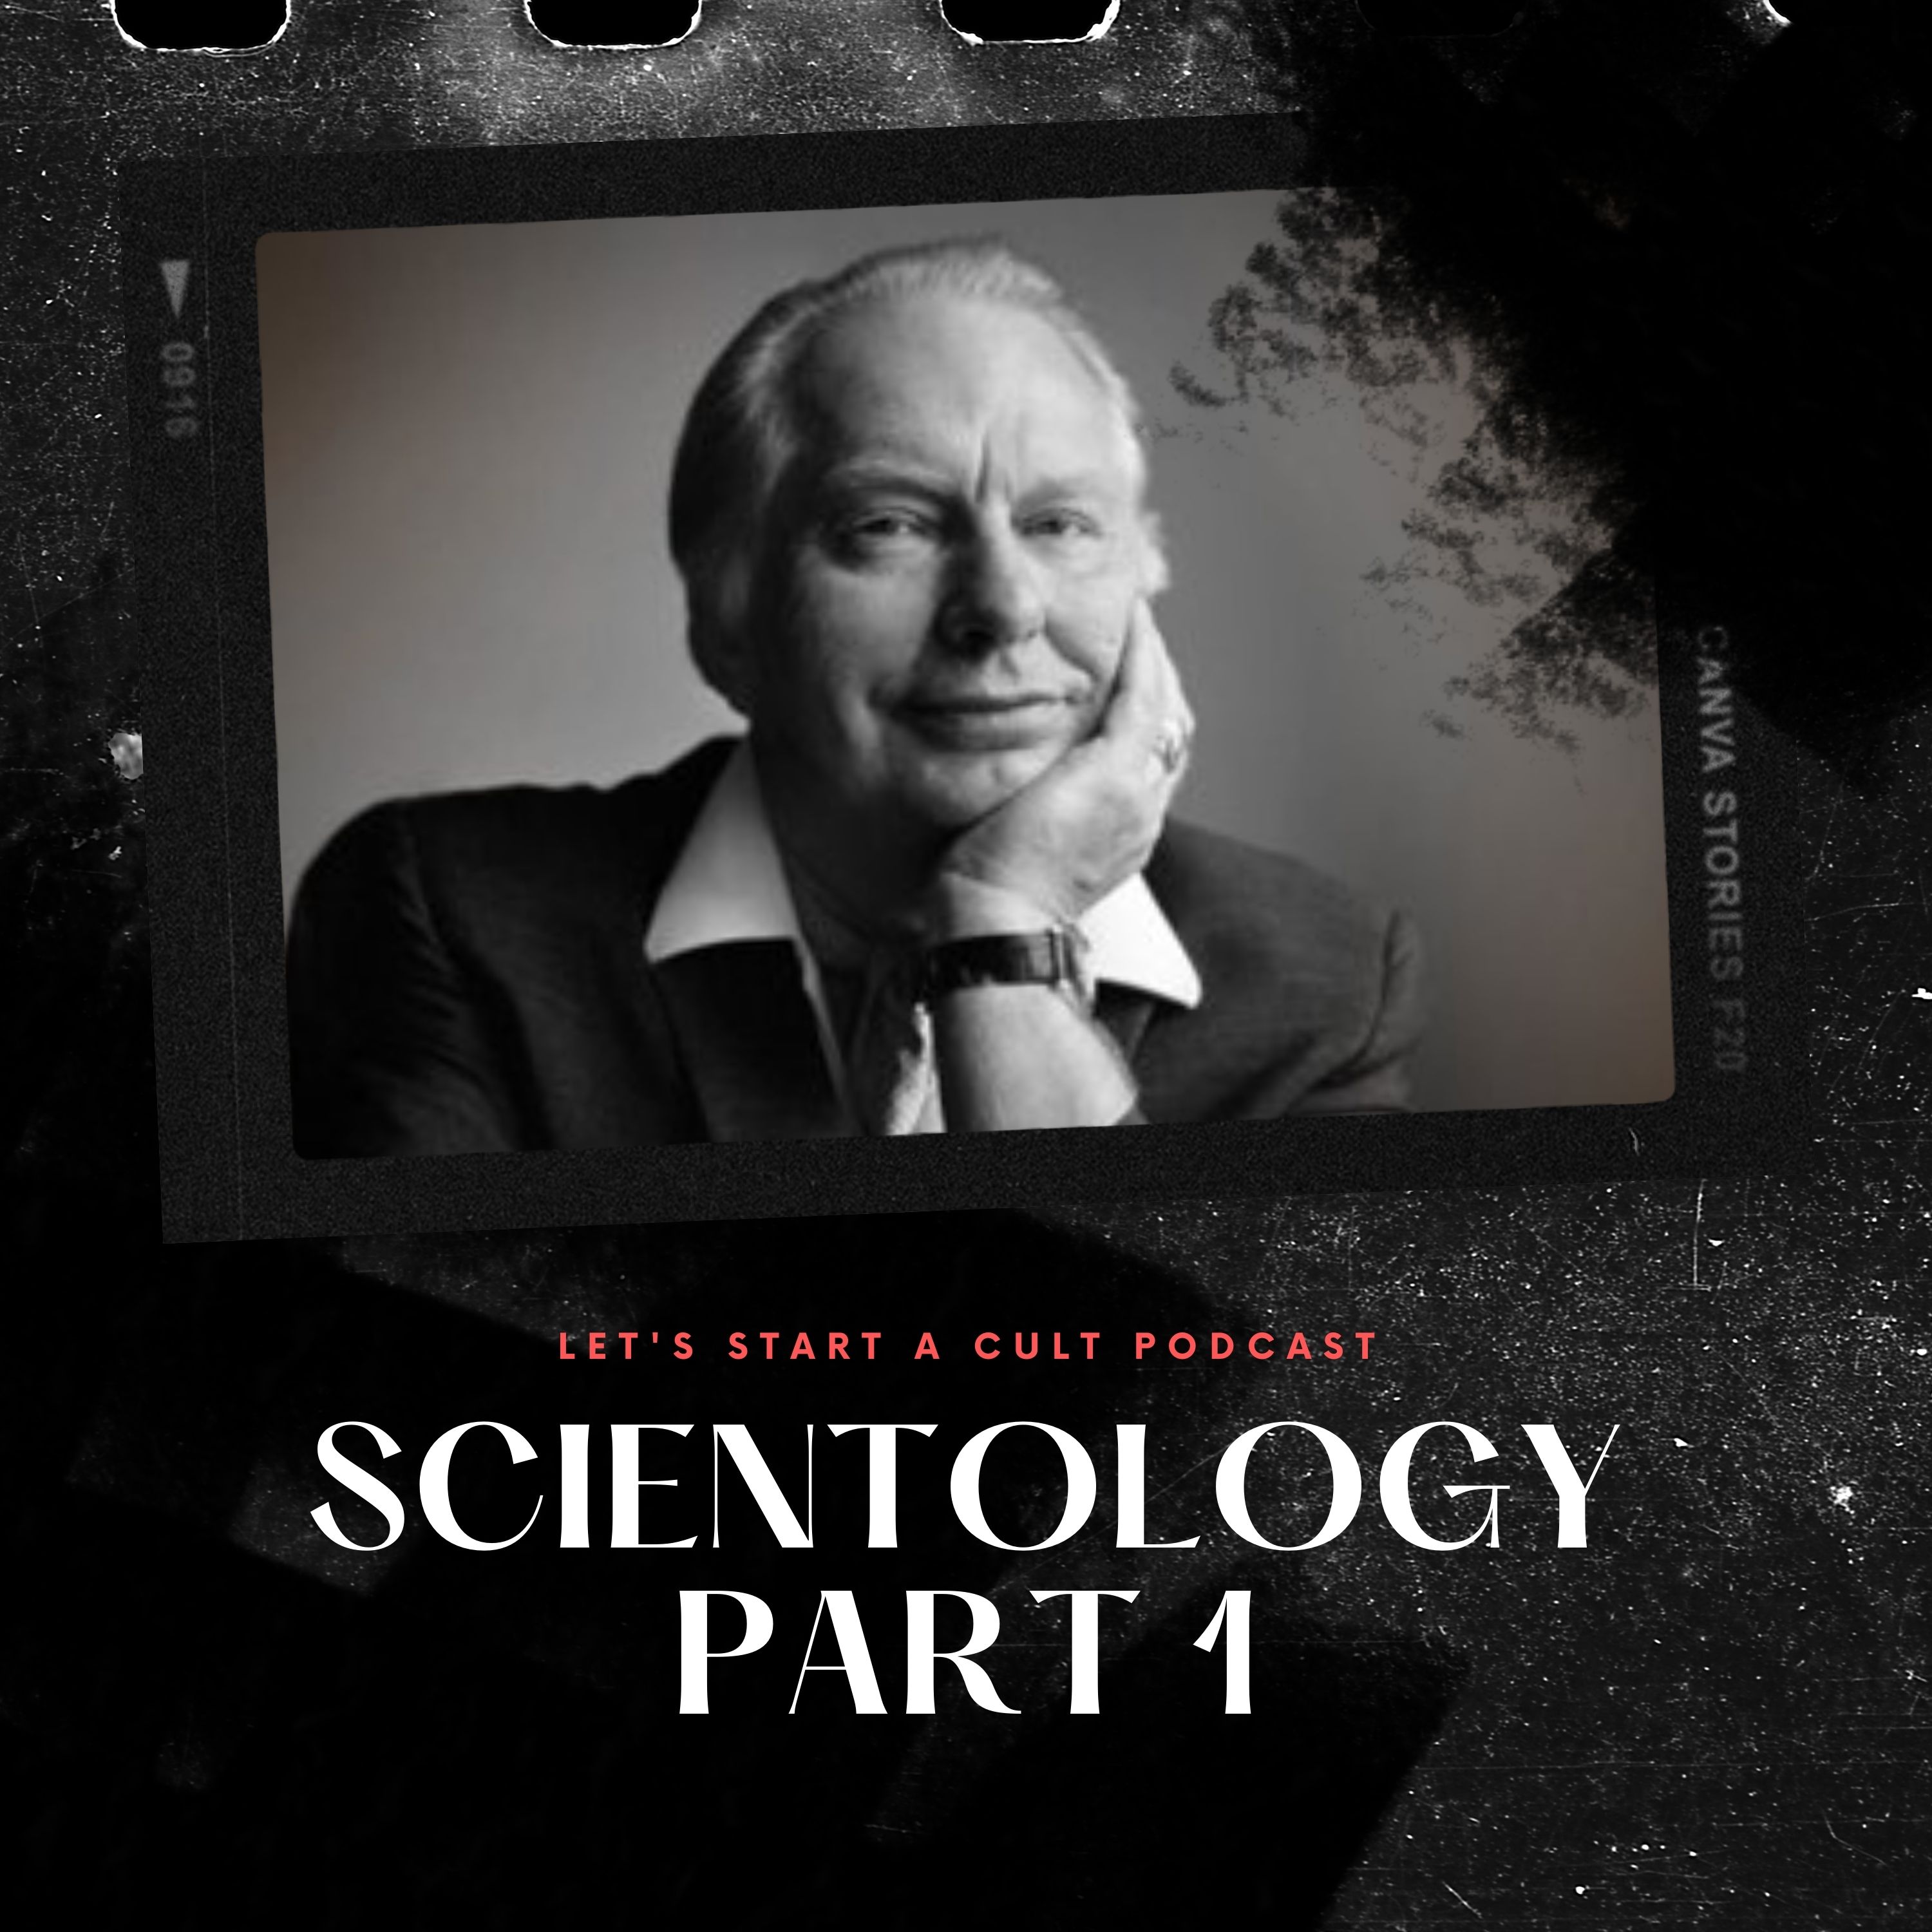 The Church of Scientology Part 1: The Story of L. Ron Hubbard